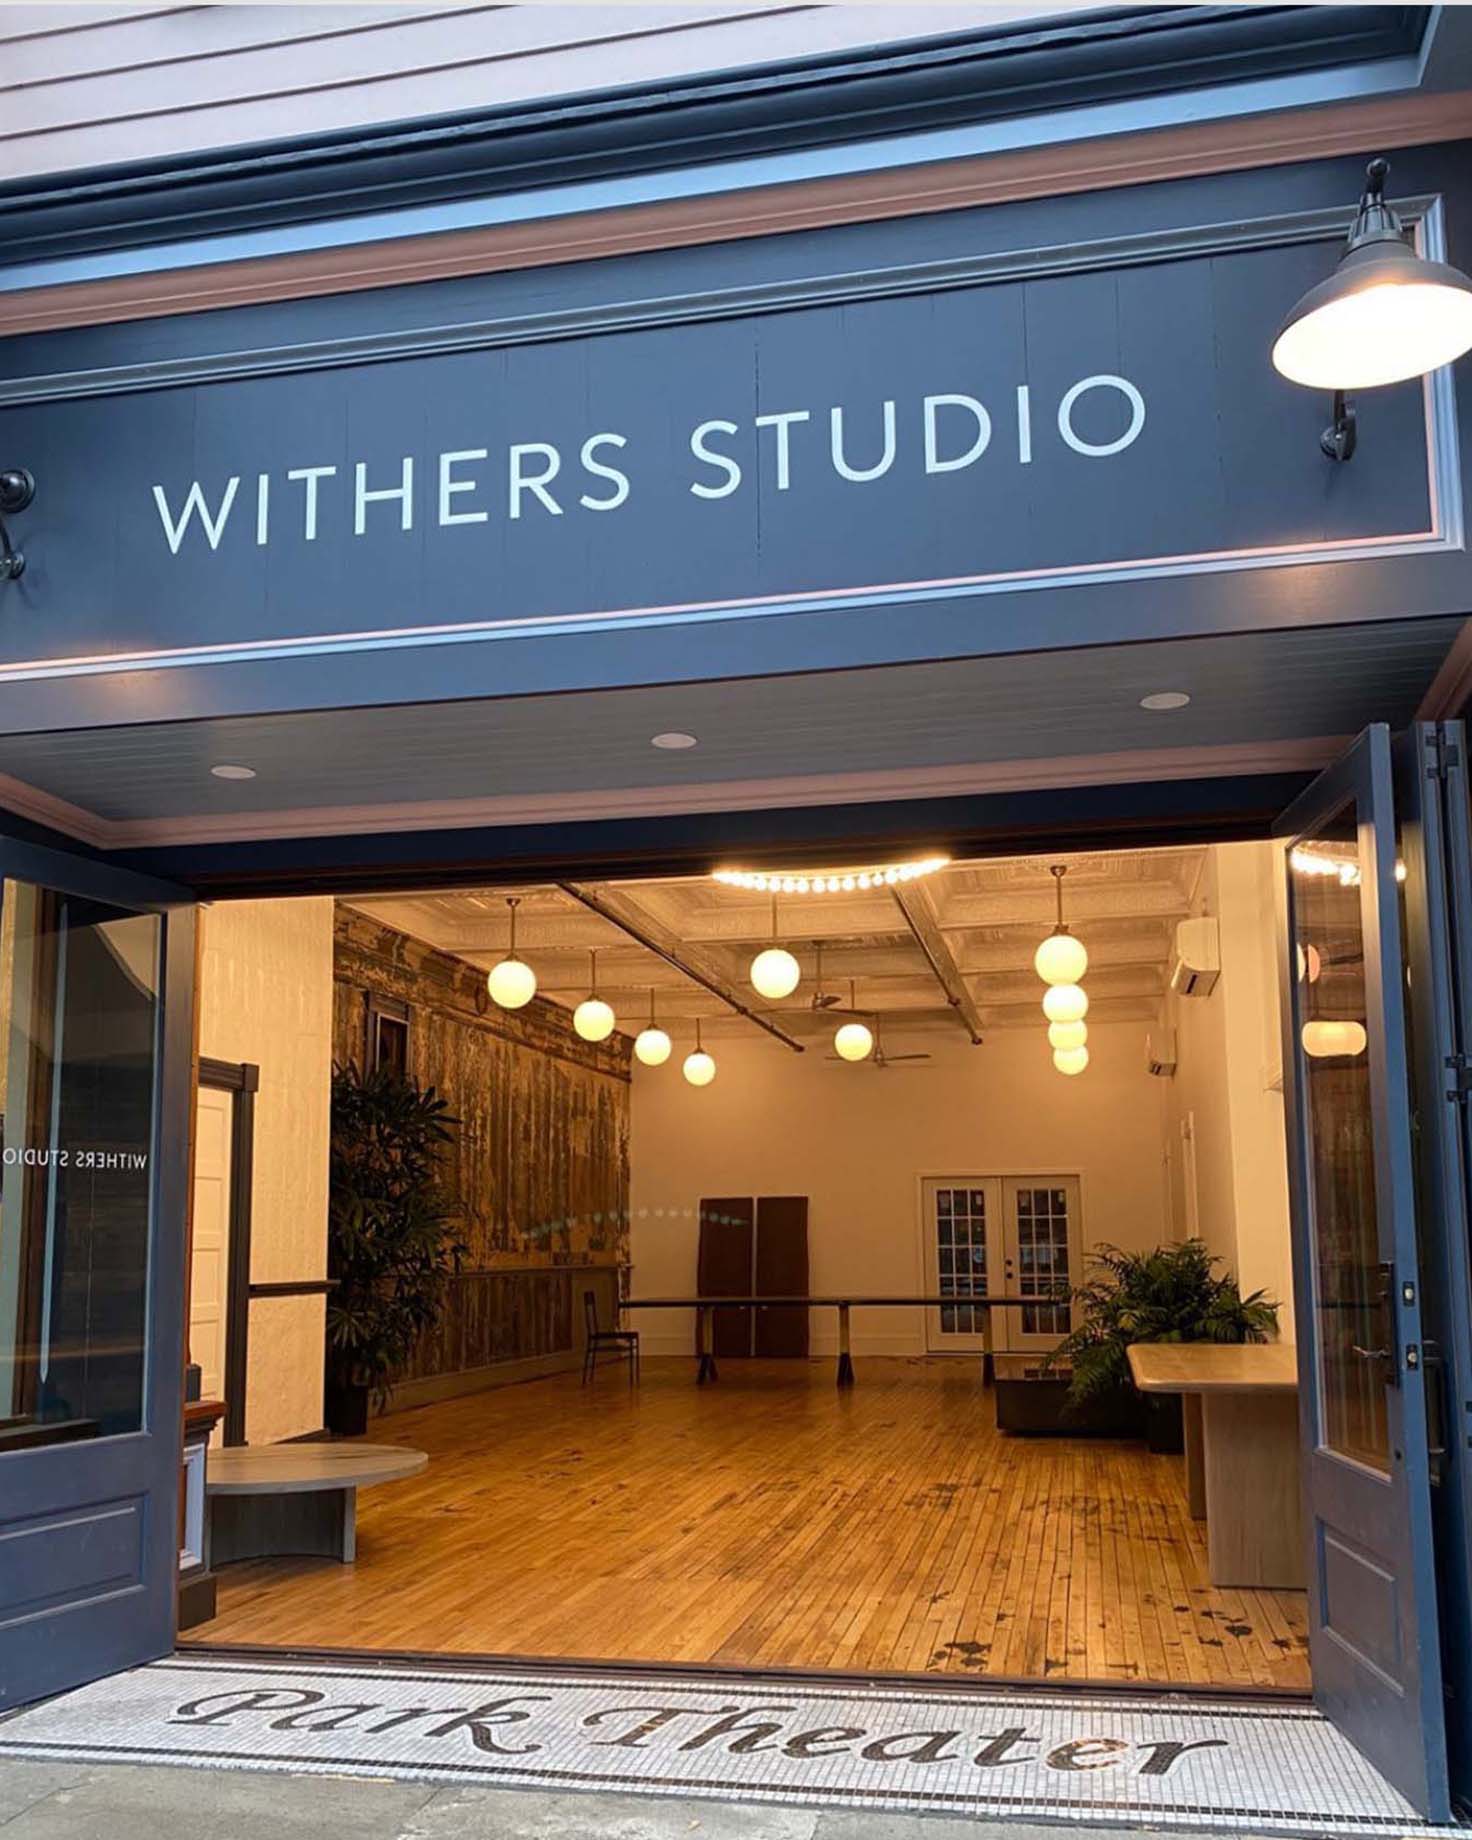 Brand store signage - Withers Studio - Whiskey and Red Small Business Branding and Website Design Packages